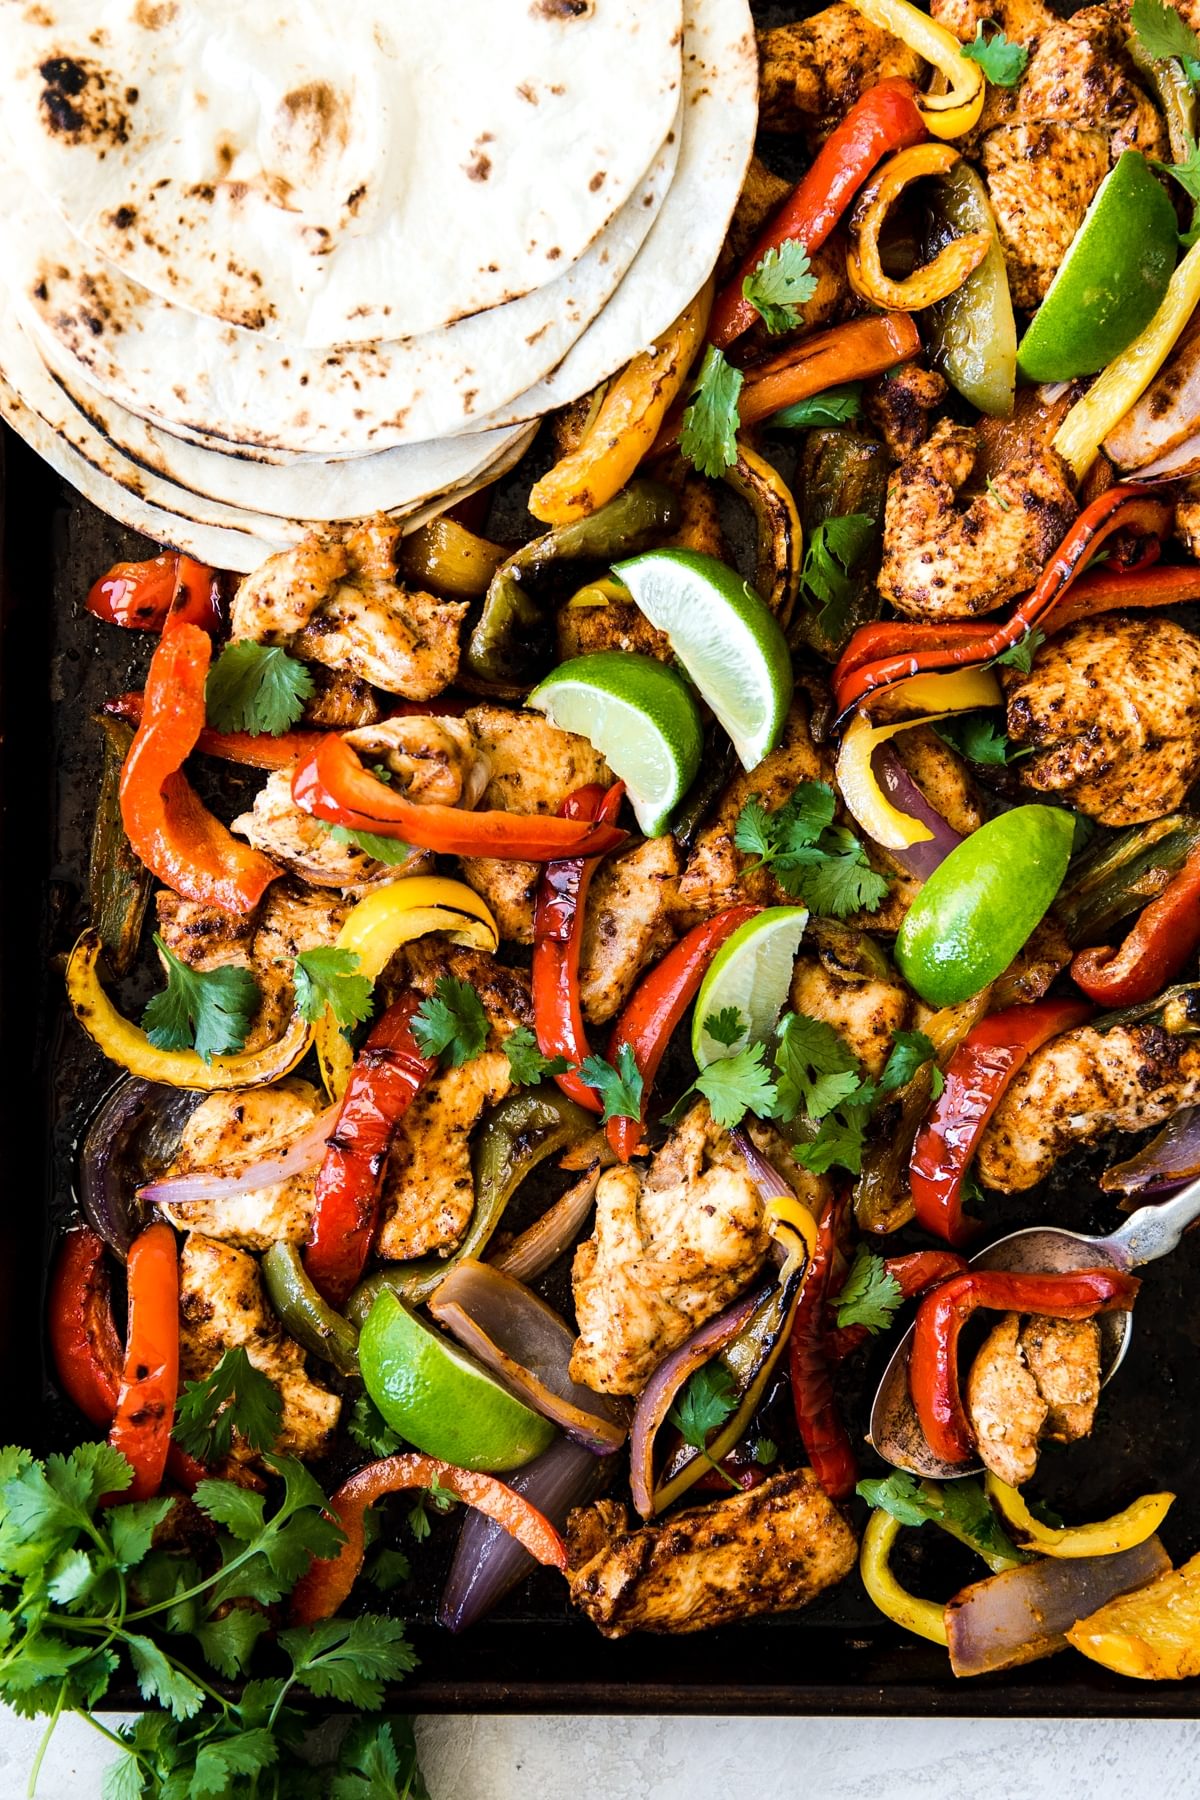 Chicken Fajitas on a sheet pan with onions, bell peppers, tortillas and a marinade.